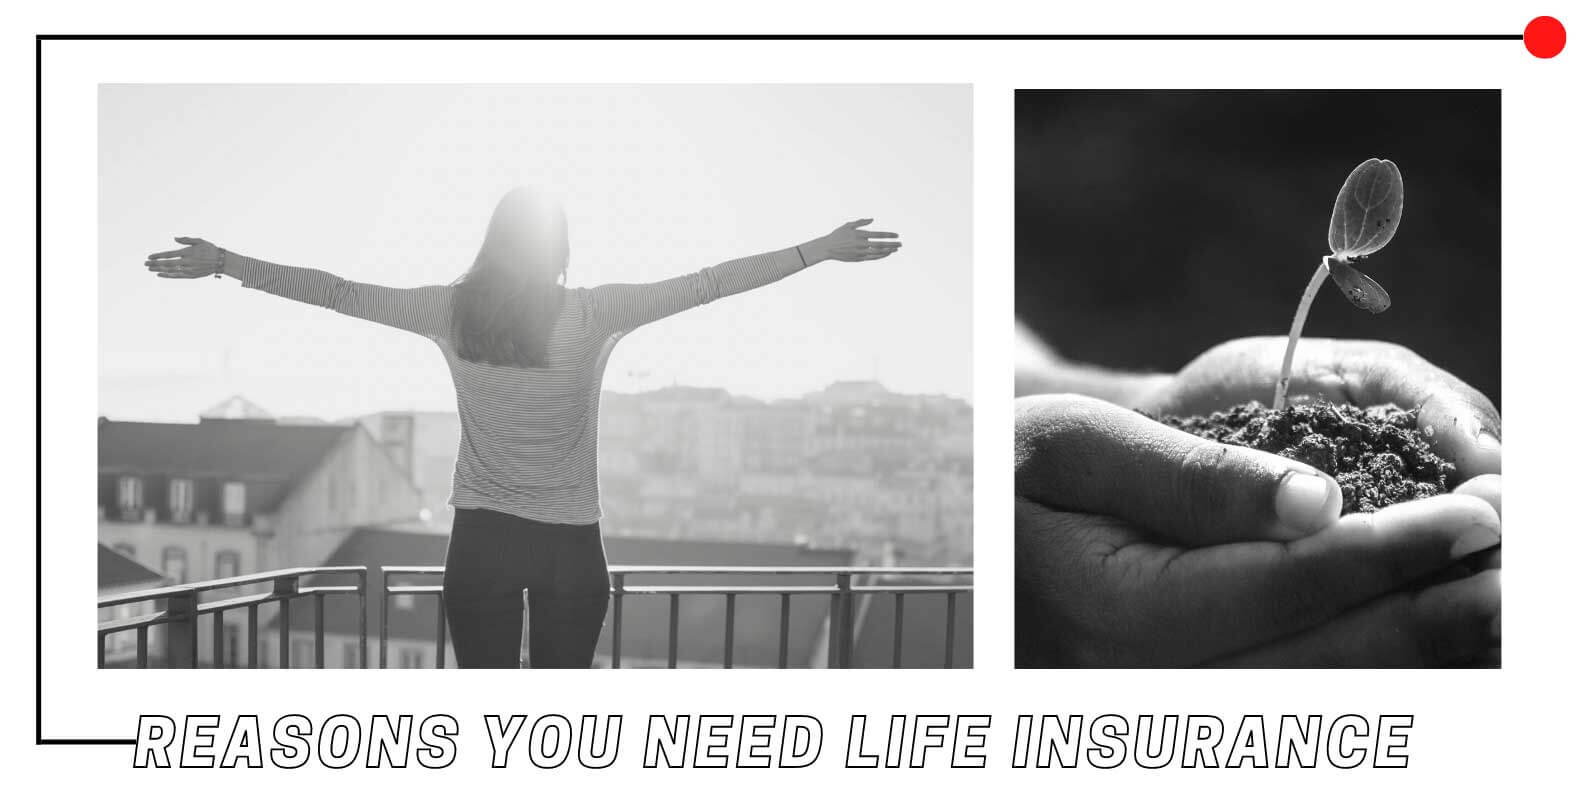 Reasons-to-Get-Life-Insurance---Lady-With-Arms-in-Air